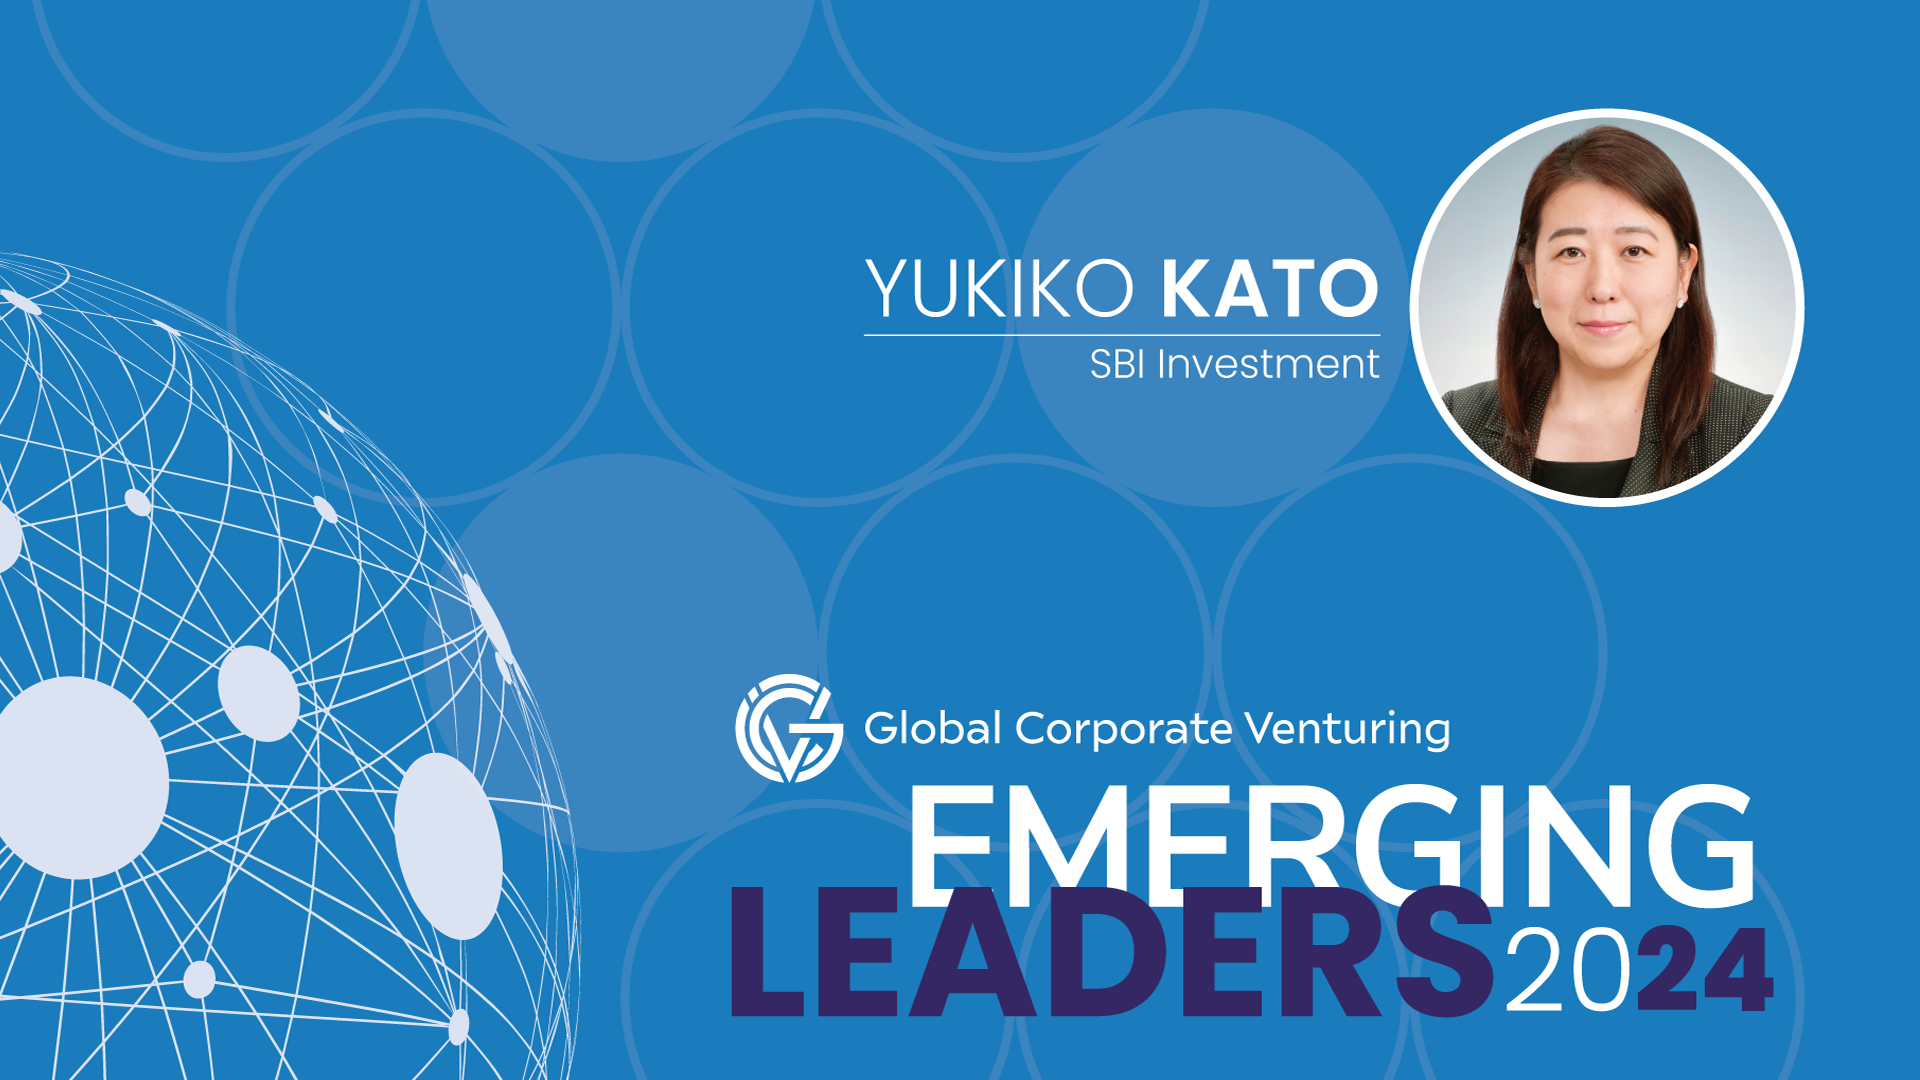 Yukiko Kato, director, executive officer and general manager of CVC department, SBI Investment